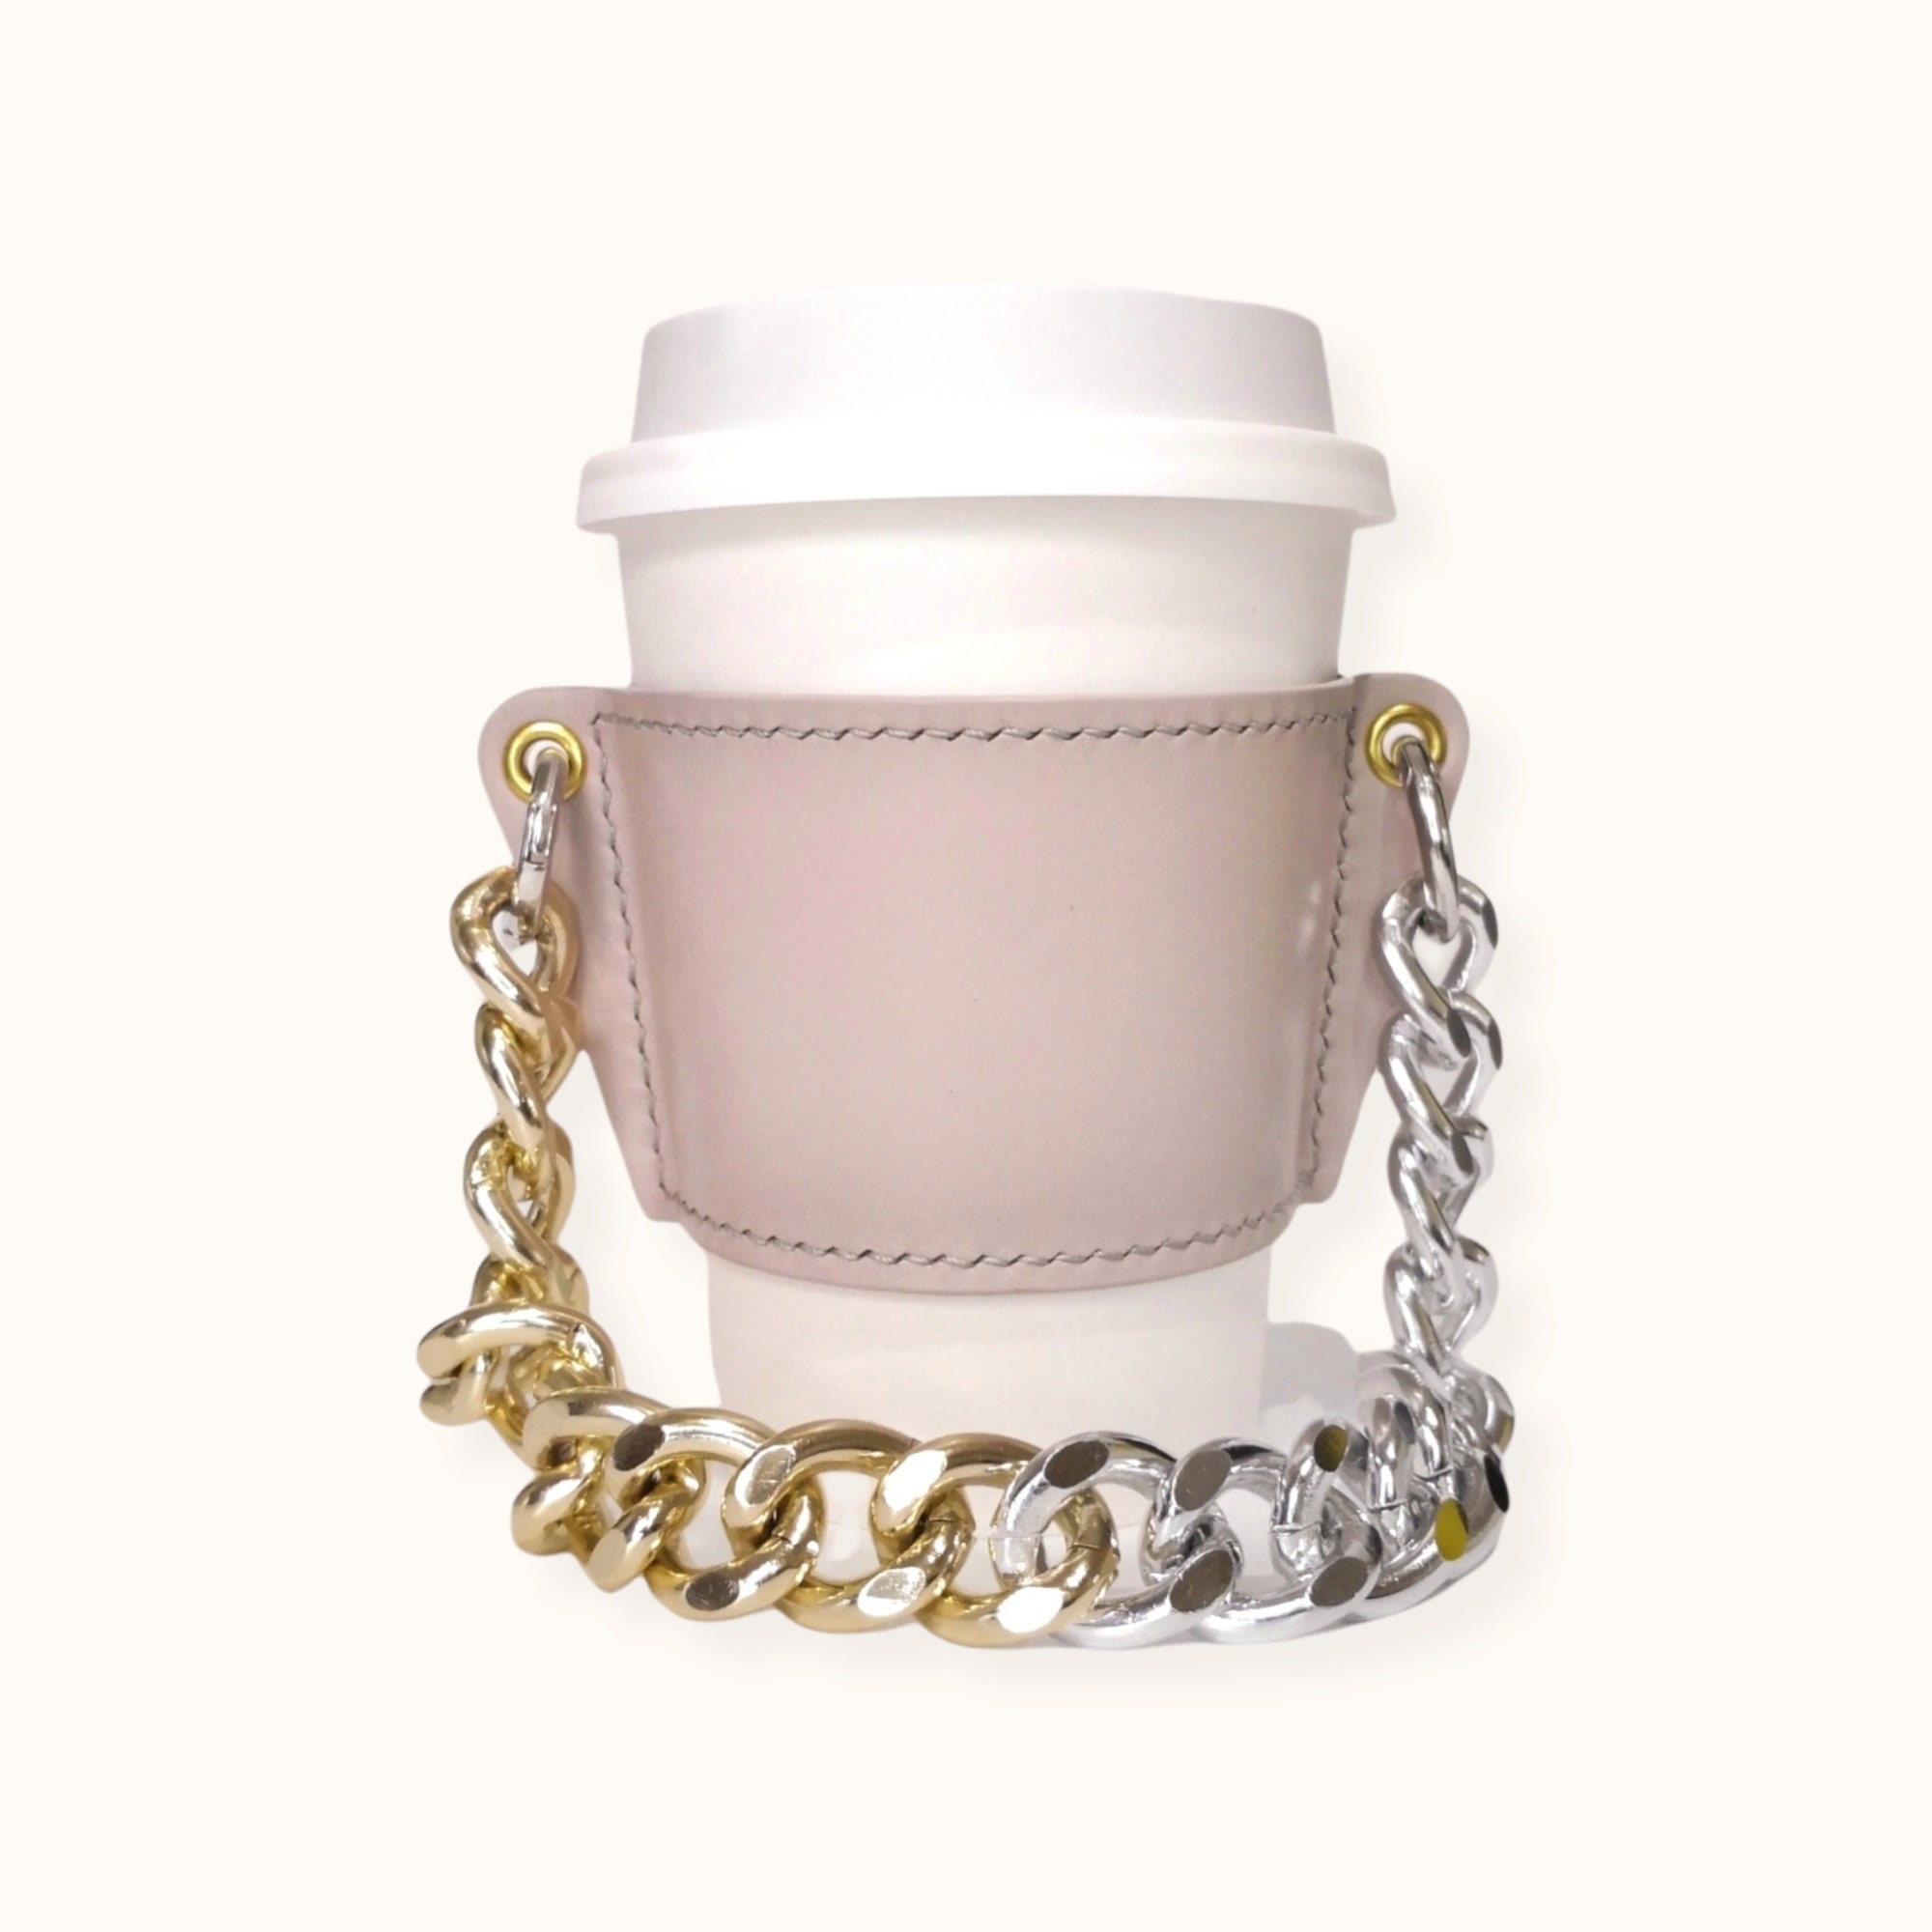 Coffee Cup Sleeve With Chain Strap, Drink Carrier for Coffee